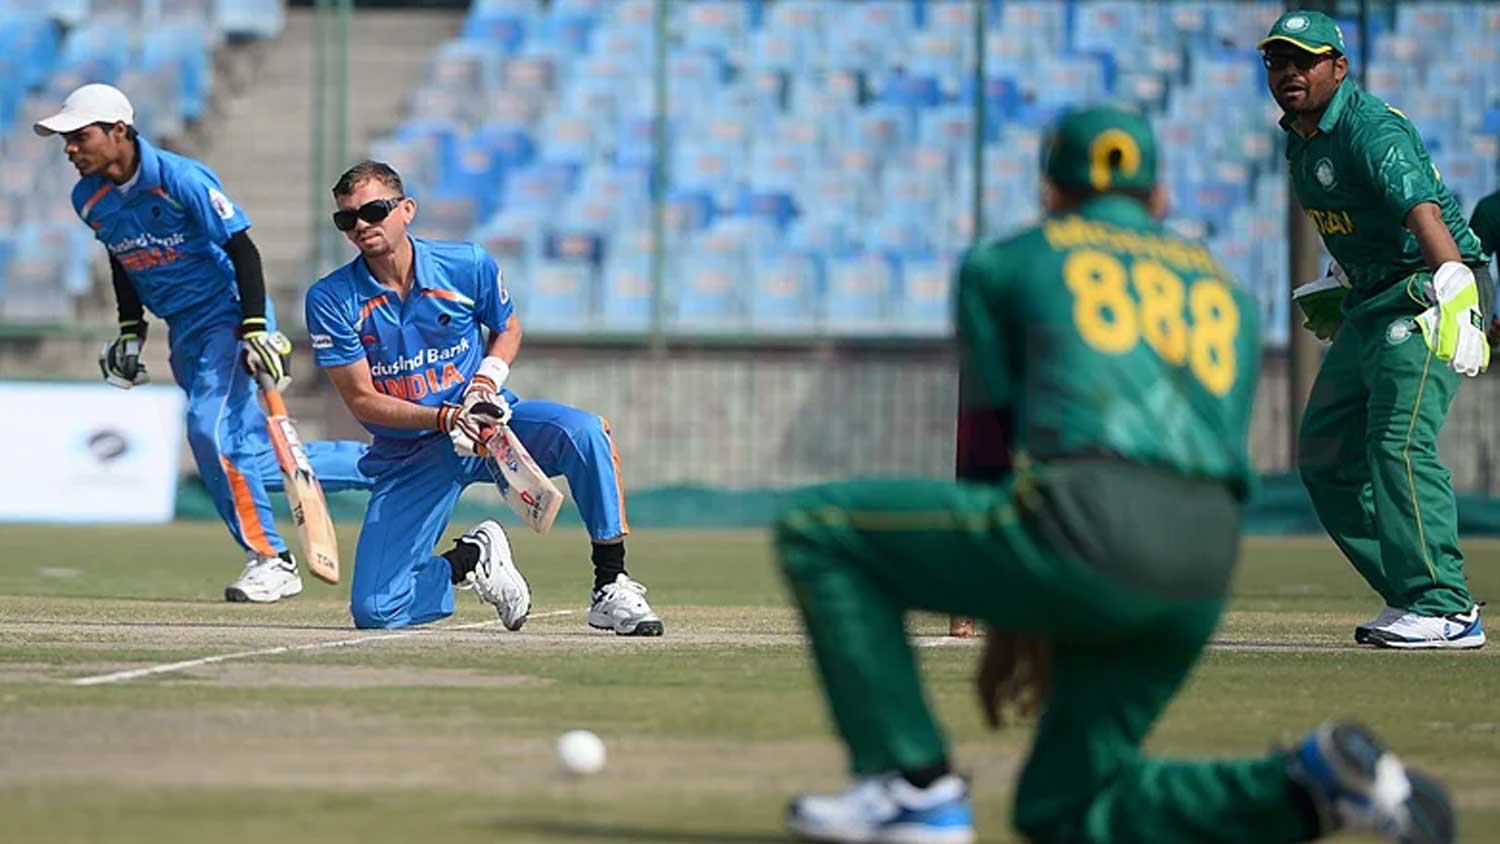 There are many differences between blind cricket and standard cricket. The image shows a blind cricket match going on between India and Pakistan.